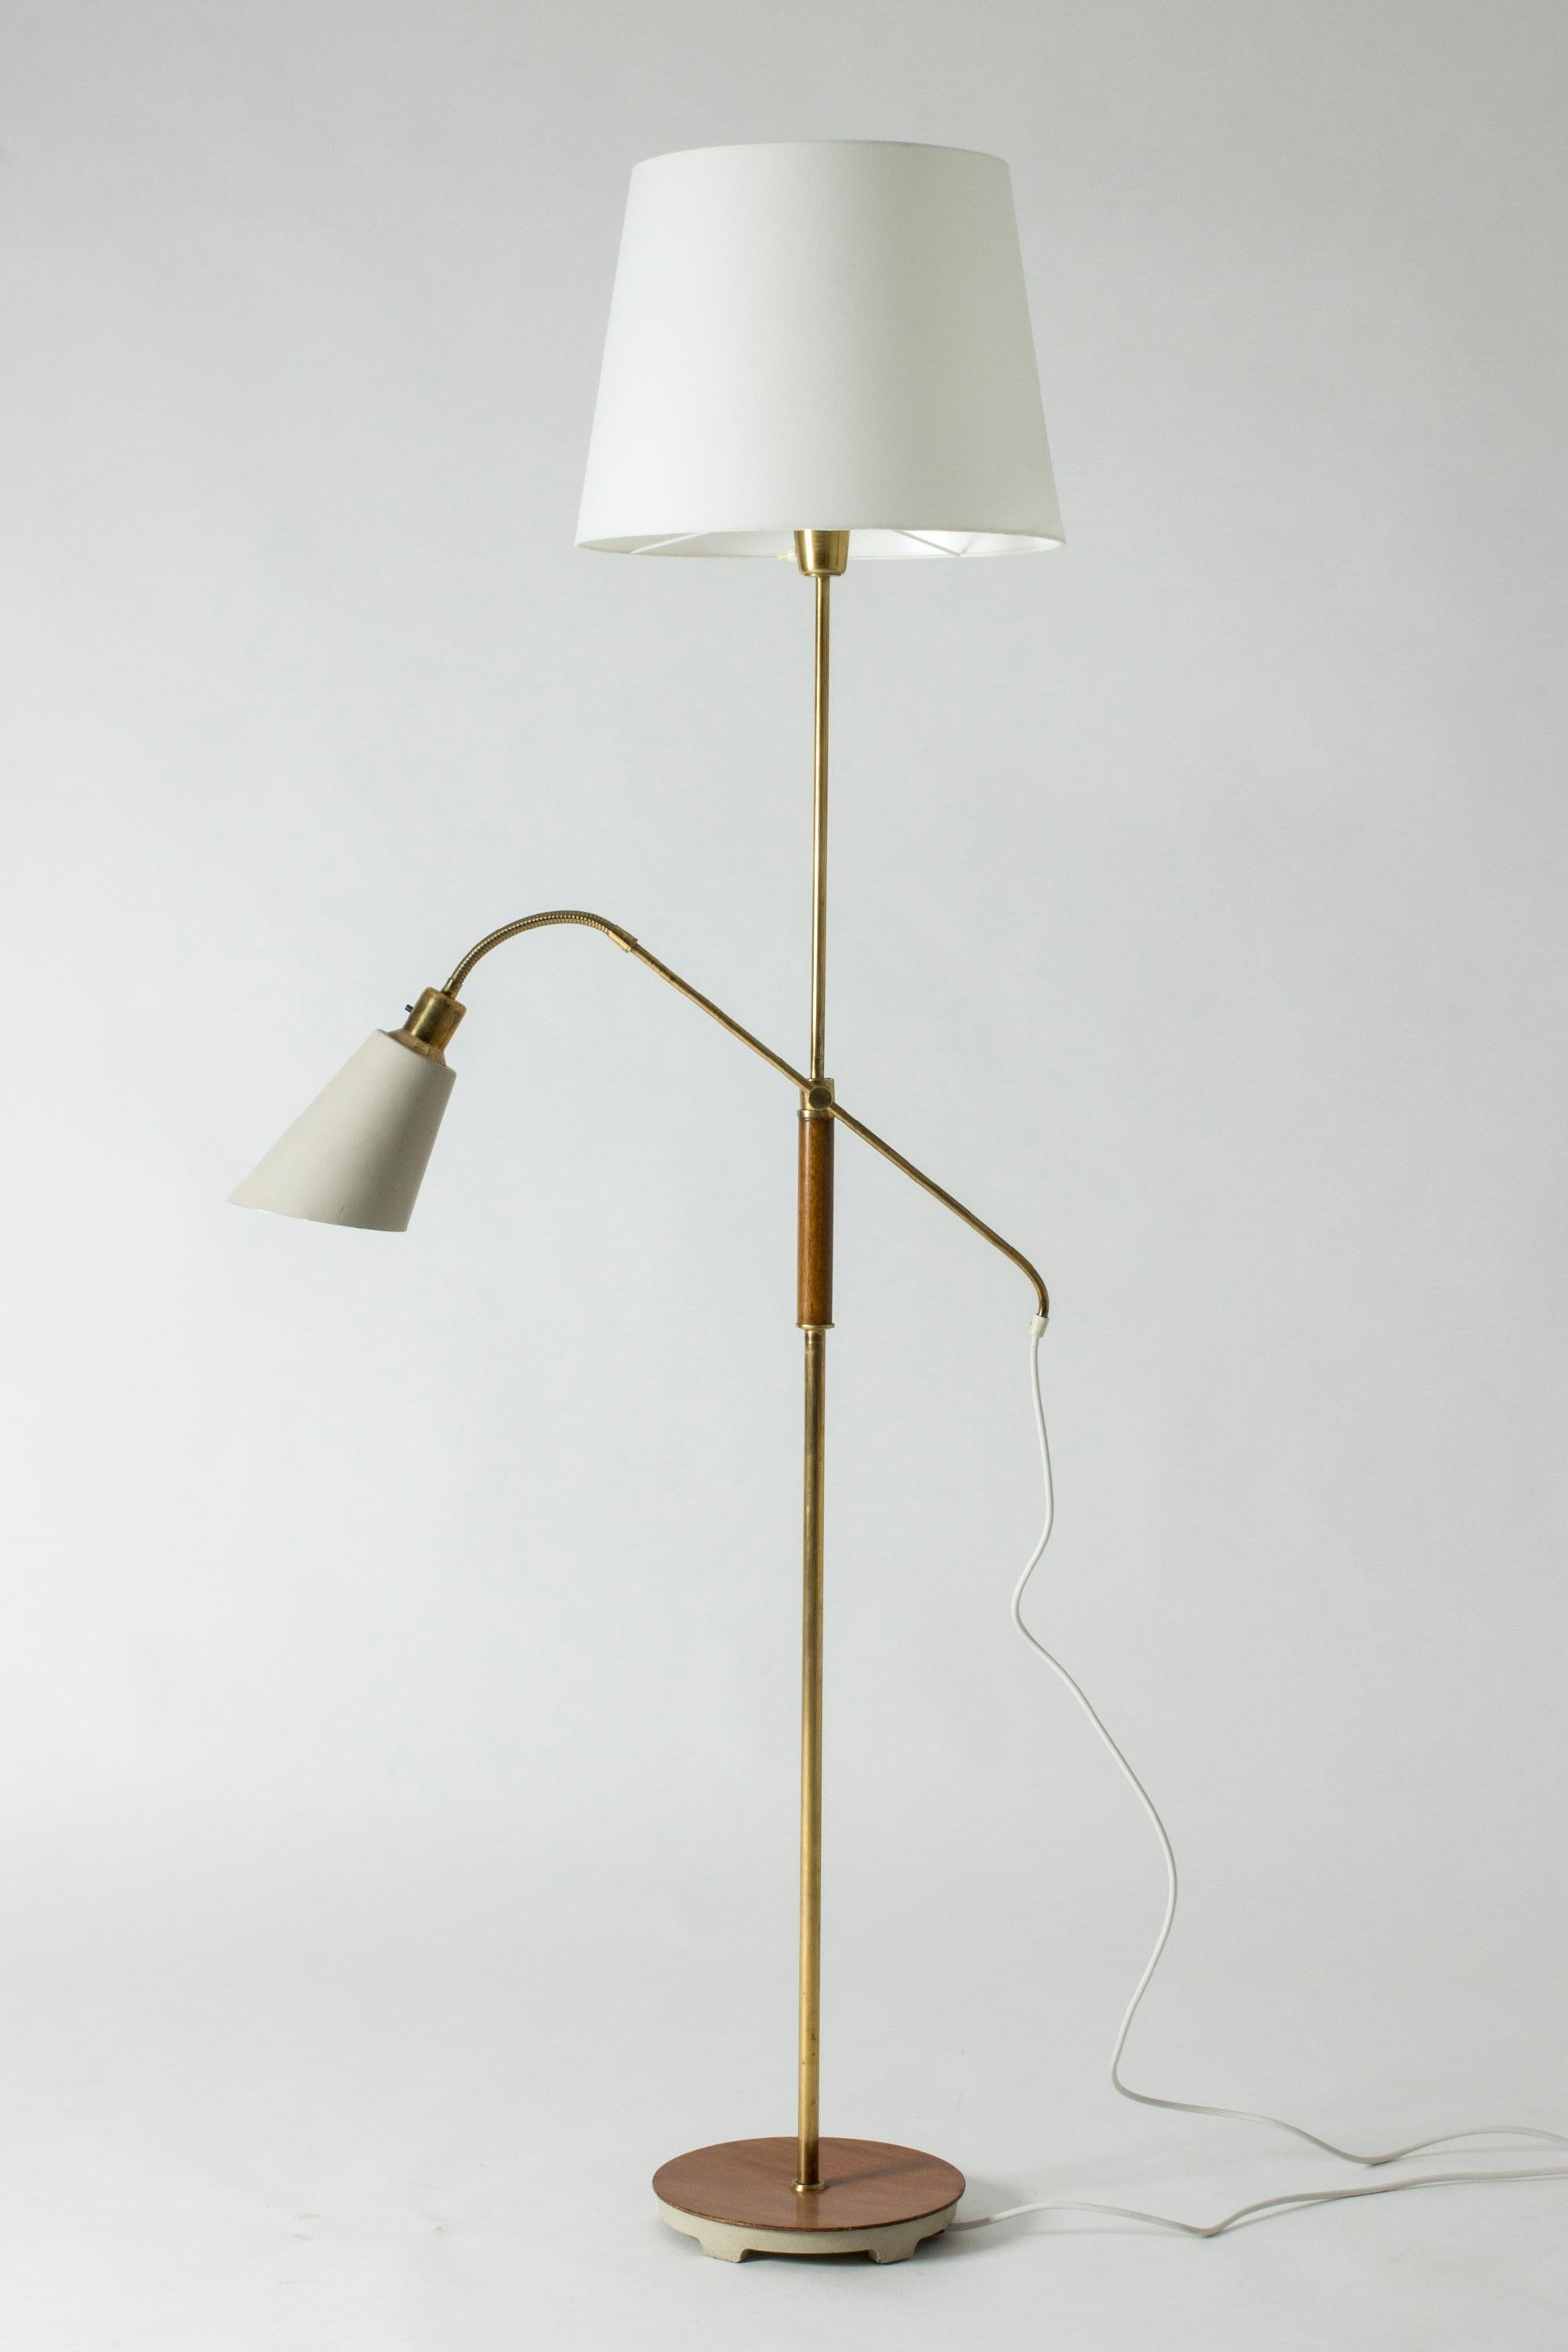 Cool floor lamp by Bertil Brisborg, made from brass, with lacquered metal and wood details. One lamp shade spreads a nice, general light, while the lacquered shade gives direct light, for example for reading. The lacquered shade can be moved